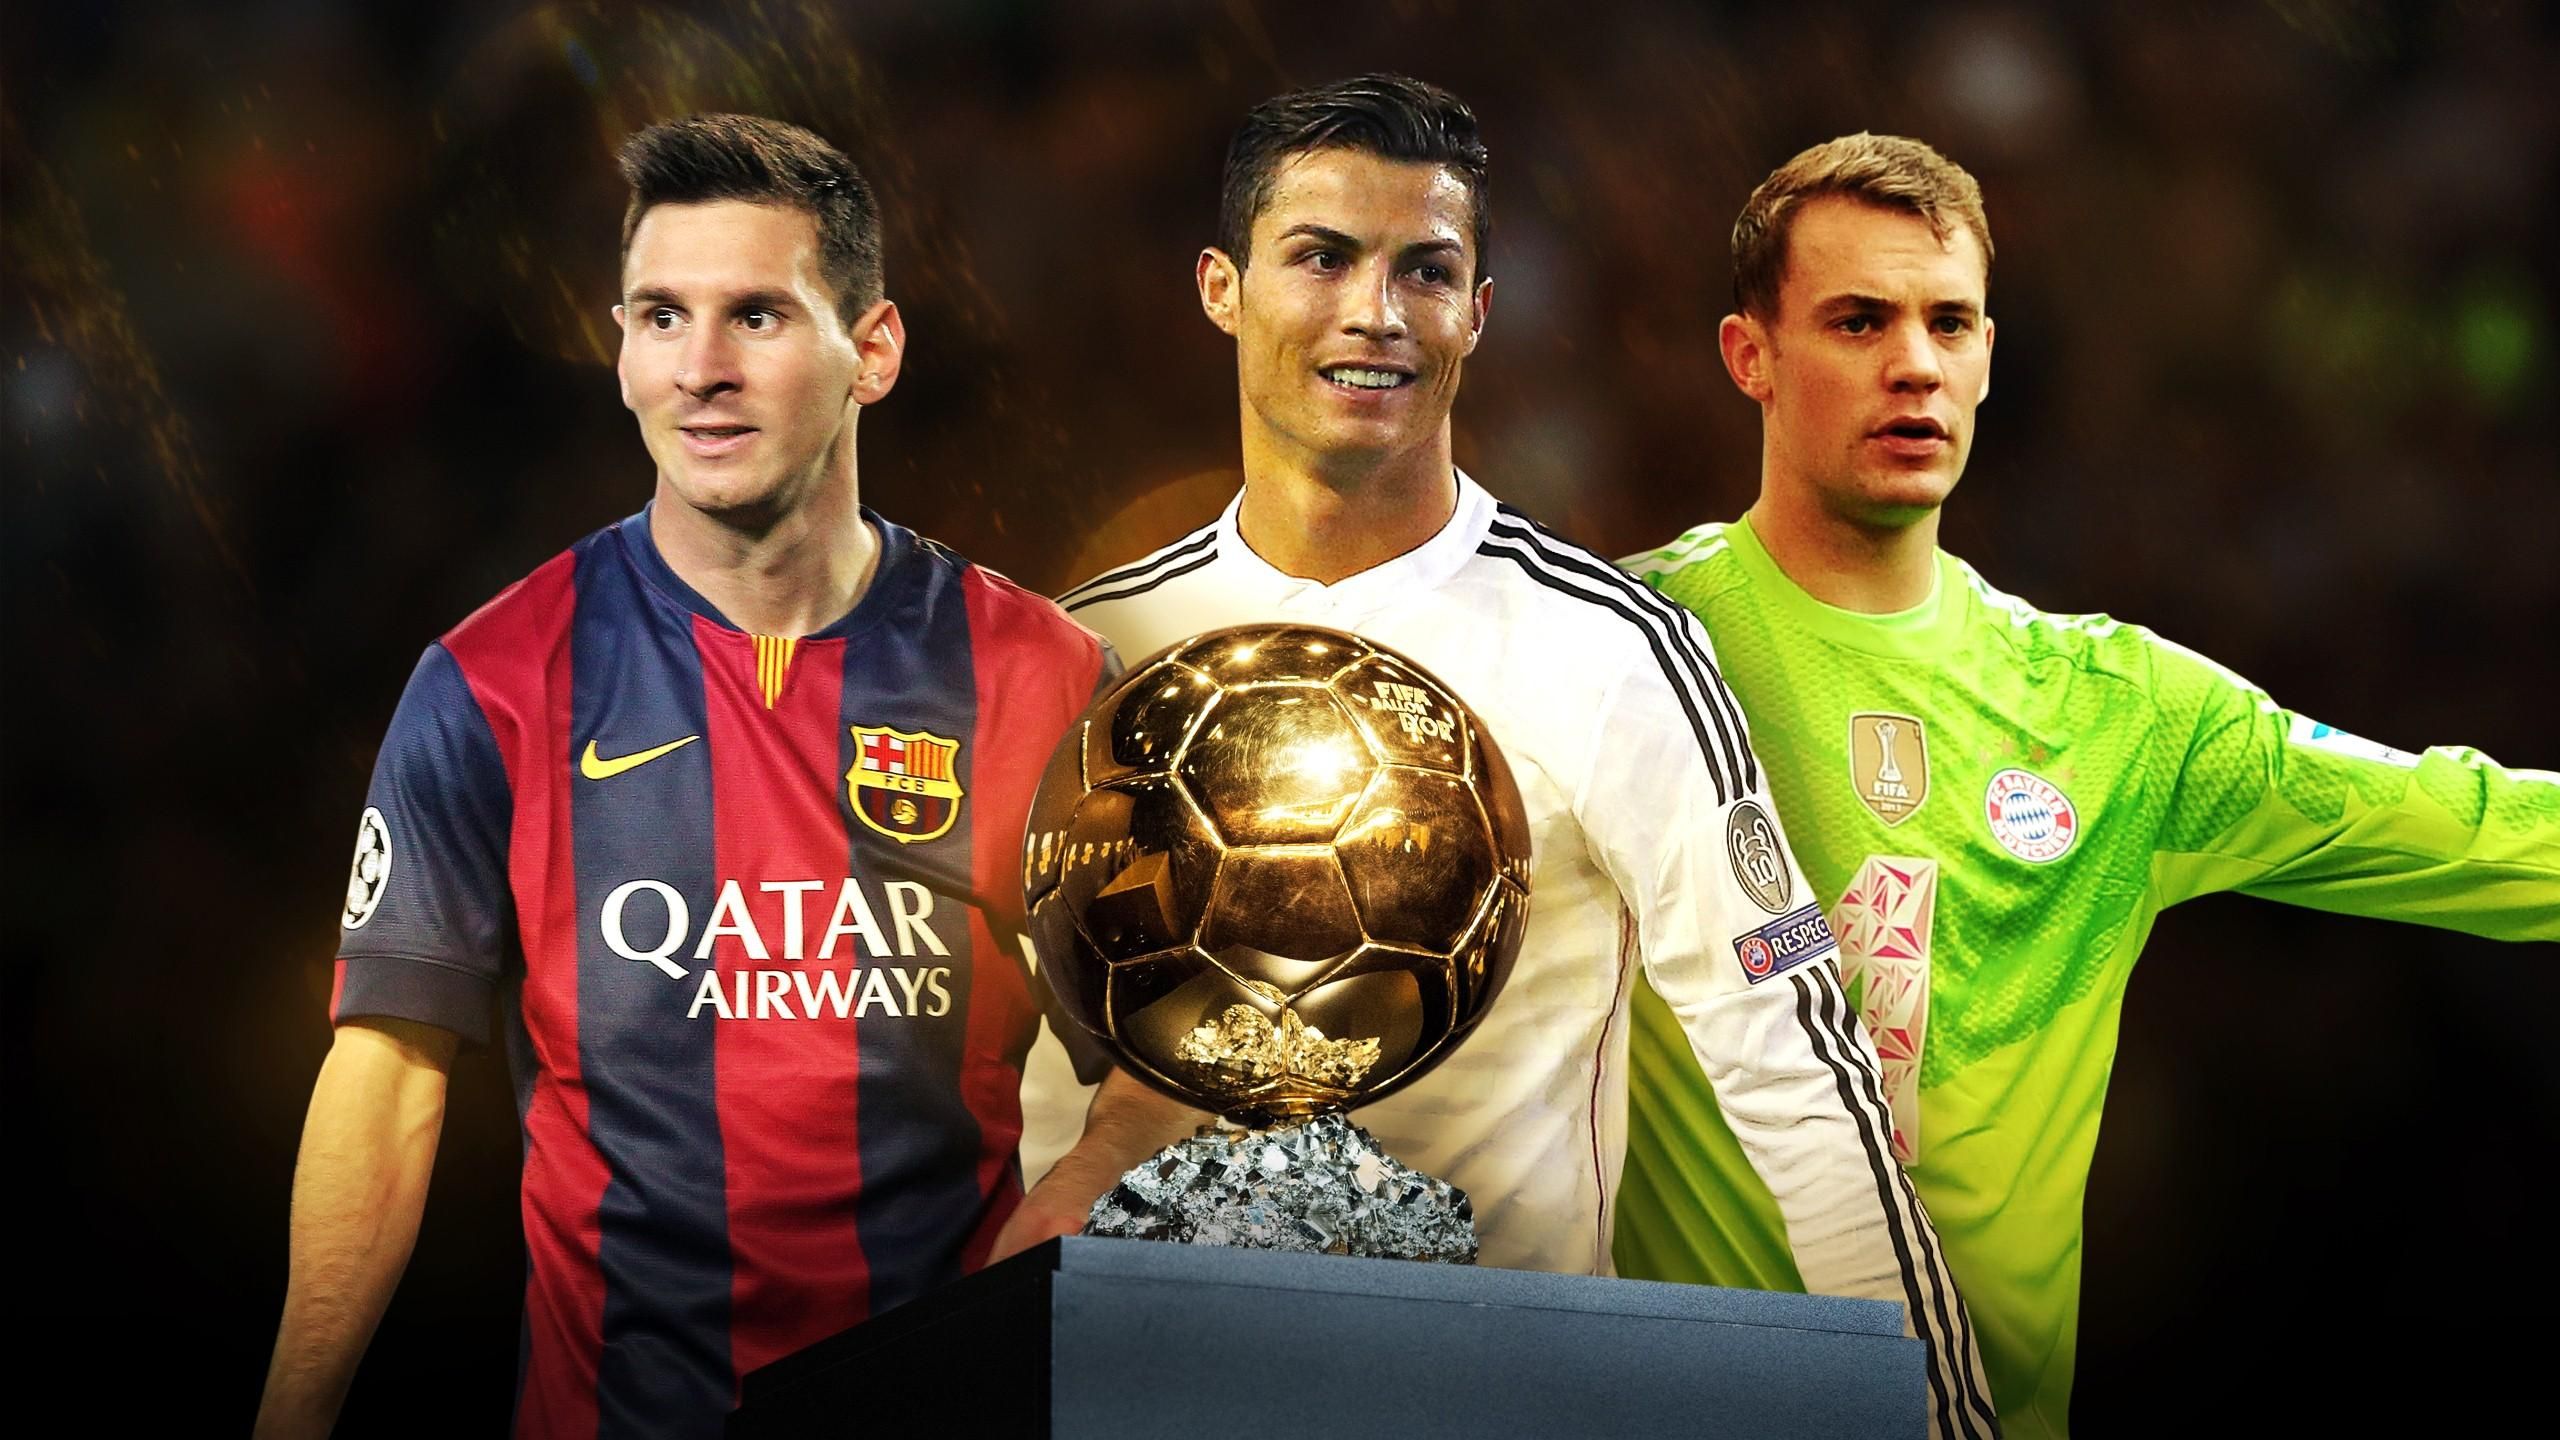 Ronaldo And Messi - Animated Wallpaper Download